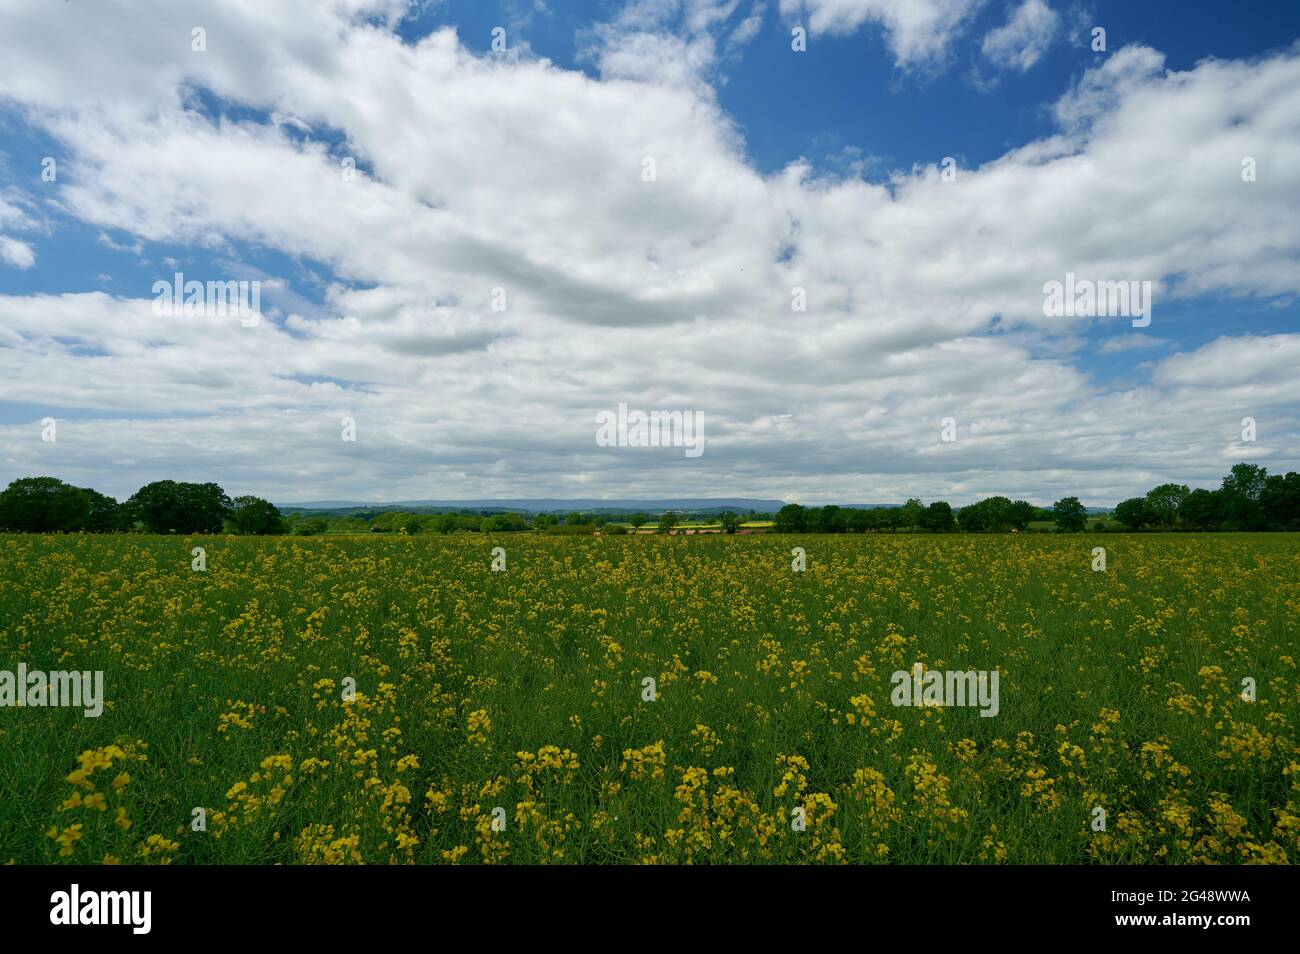 Agriculture farm field in english countryside with blue sky and small clouds and yellow meadow flowers Stock Photo